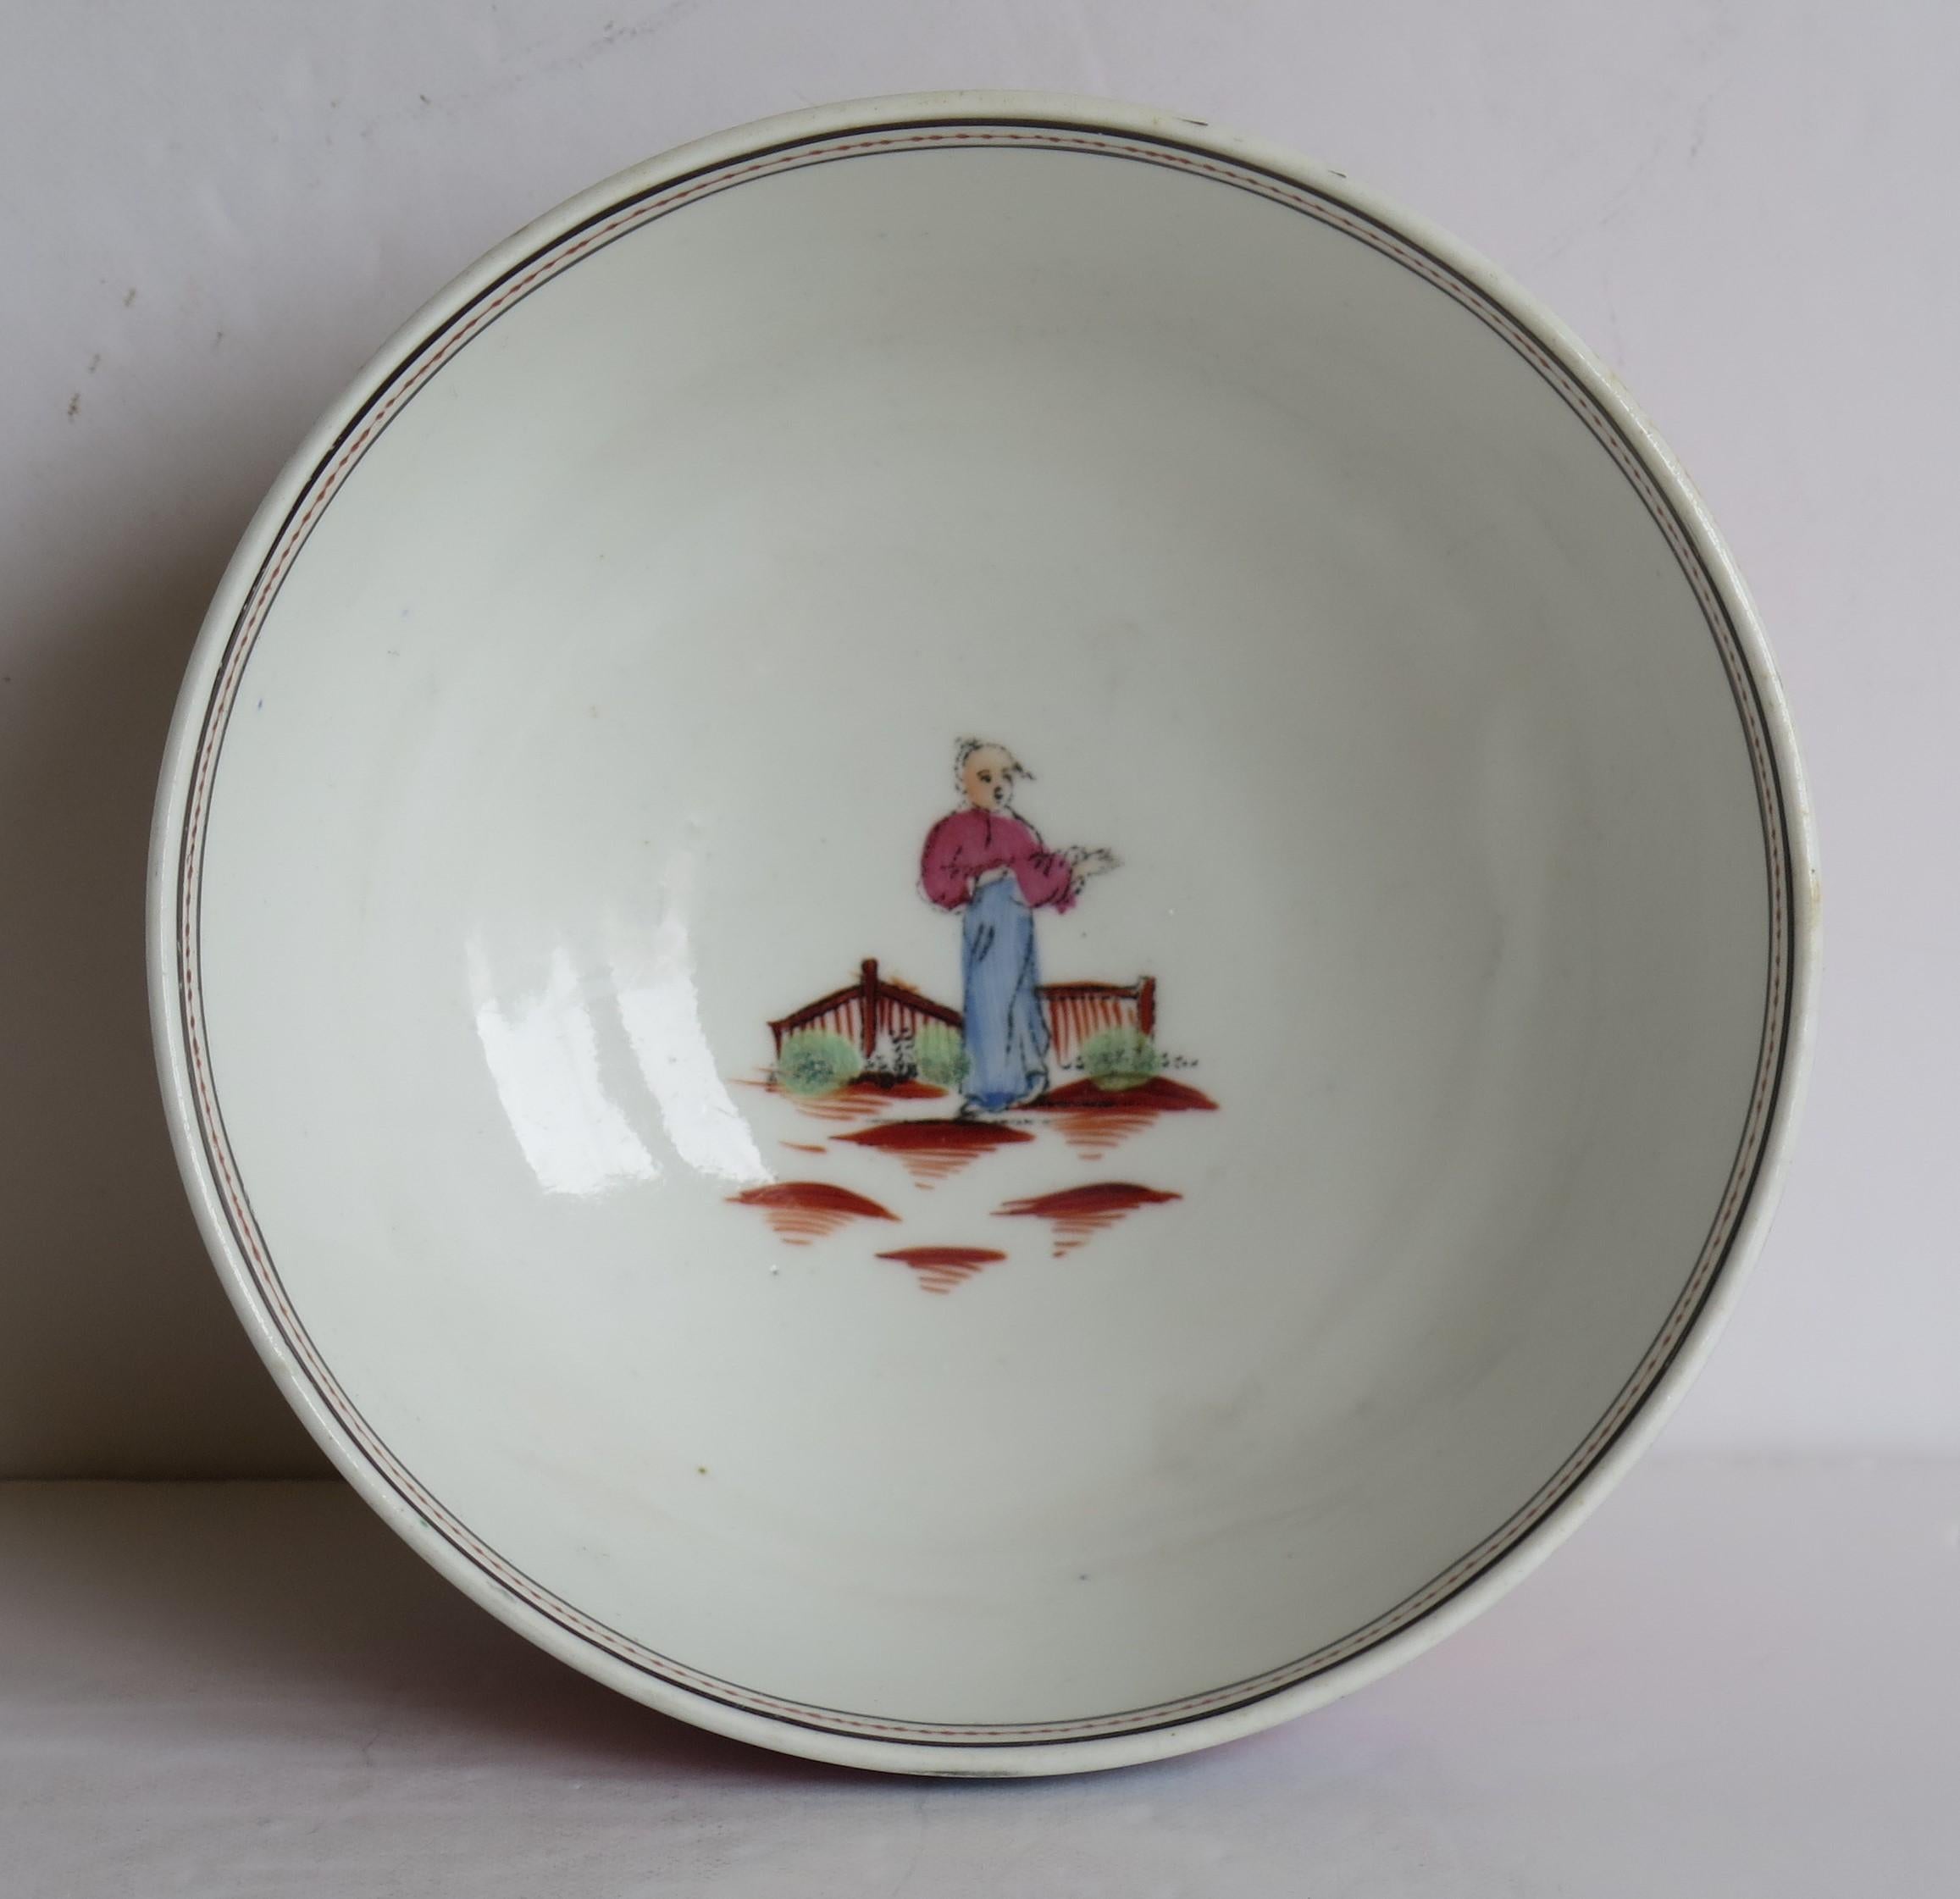 Hand-Painted Early New Hall Porcelain Bowl with Boy in Window Pattern No. 425, circa 1800 For Sale